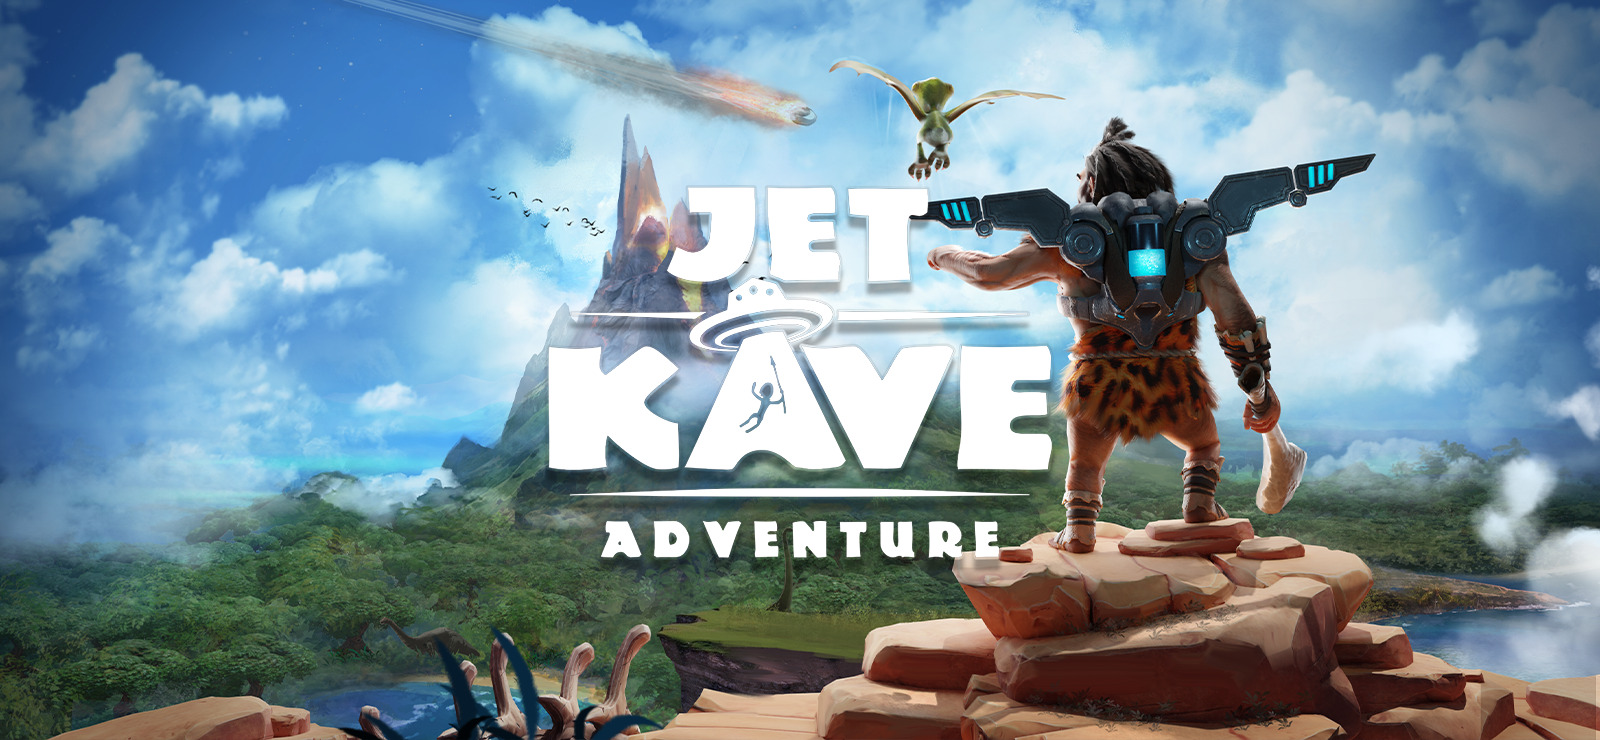 Jet Kave Adventure Giveaway · Video Chums